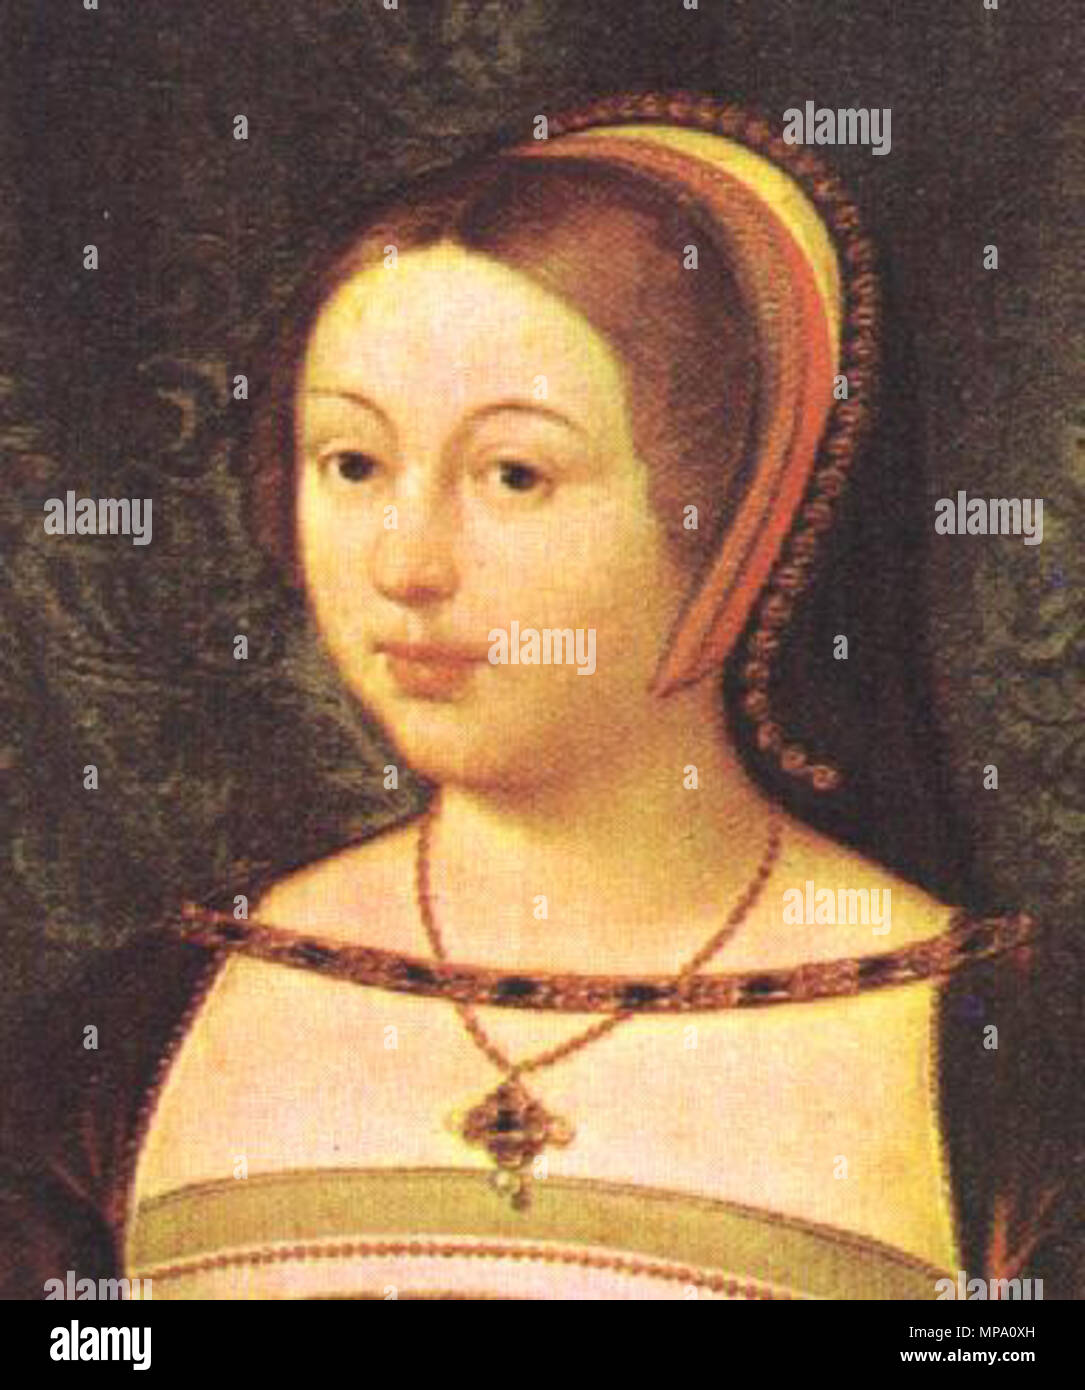 . Margaret Tudor, daughter of Henry VII of England, sister of Henry VIII, wife of James IV of Scotland and mother of James V. Unknown date.   Daniël Mijtens  (circa 1590–circa 1647)     Alternative names Daniël Mijtens the Elder, Daniel Mytens (I), Daniel van Mytens (I)  Description Dutch painter, draughtsman and court painter  Date of birth/death circa 1590 circa 1647  Location of birth/death Delft The Hague  Work period from 1610 until 1647  Work location The Hague (1610-1617), England (1617-1634), The Hague (1634-1647)  Authority control  : Q655535 VIAF: 51617512 ISNI: 0000 0000 8129 6245 U Stock Photo